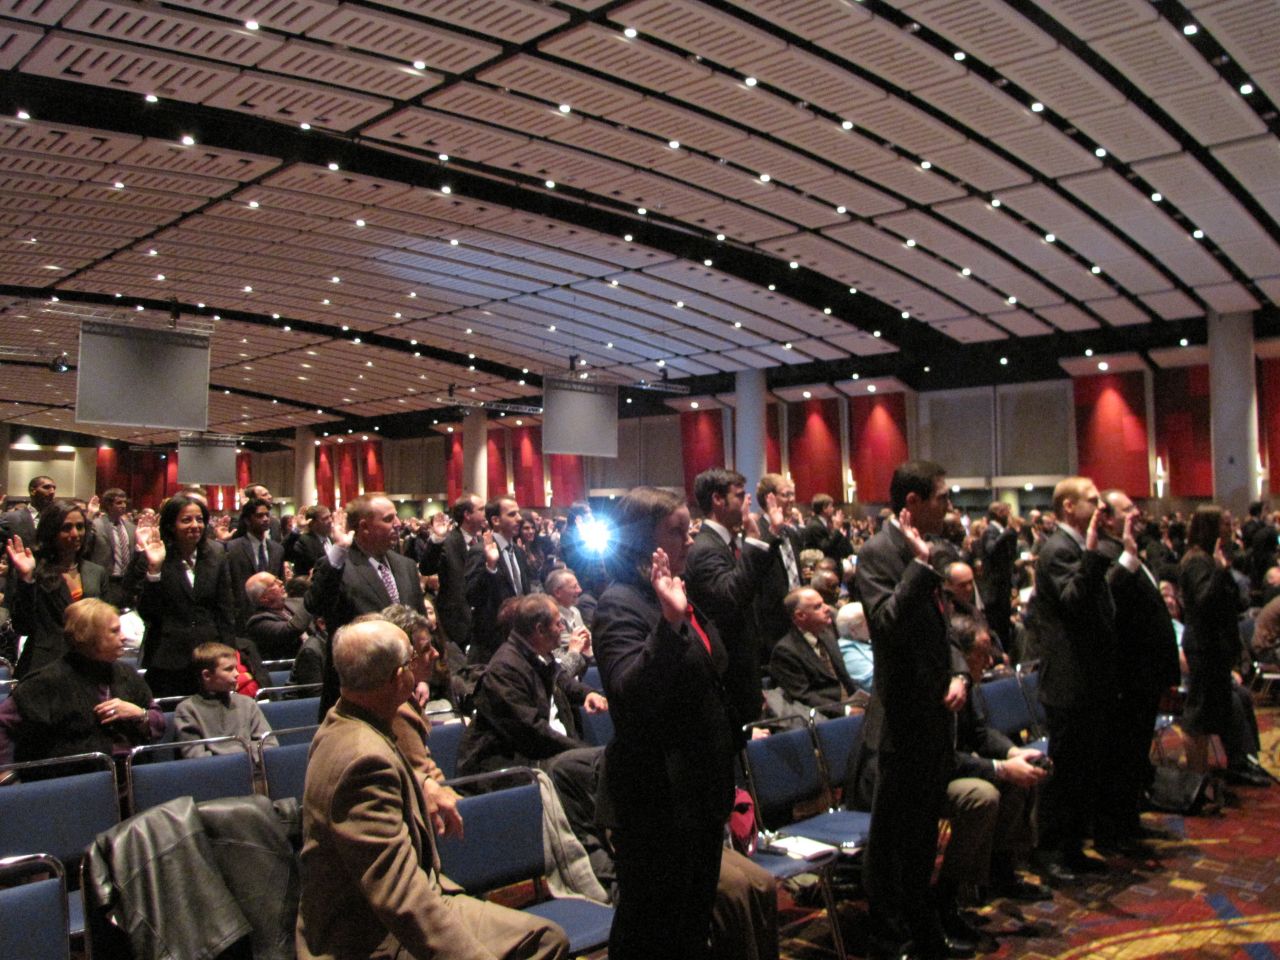 Over 1,800 new lawyers were sworn-in on Thursday at McCormick Place.